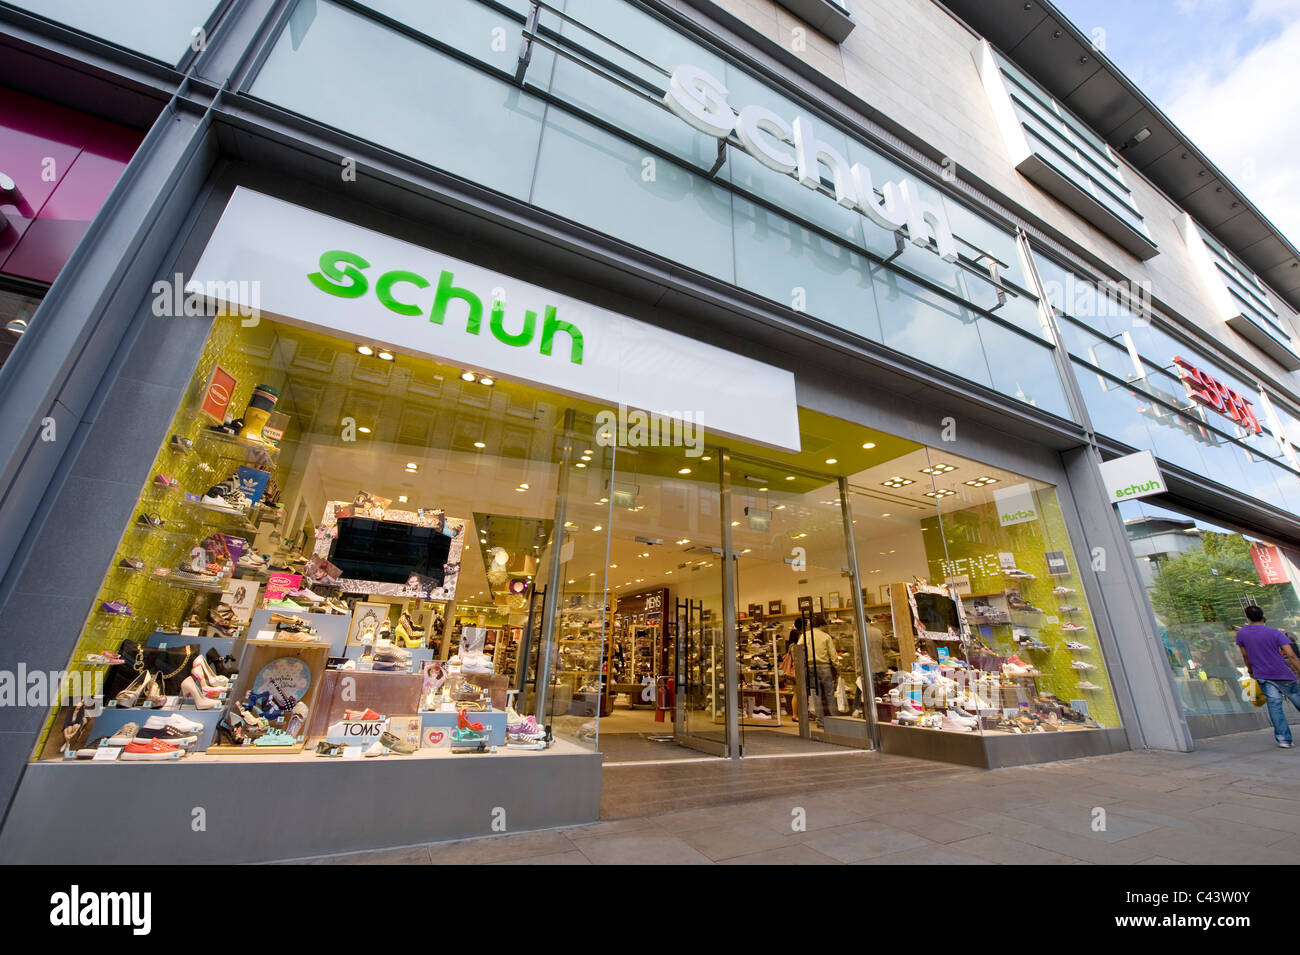 The storefront of the high street retailer Schuh on Market Street, Manchester. (Editorial use only). Stock Photo